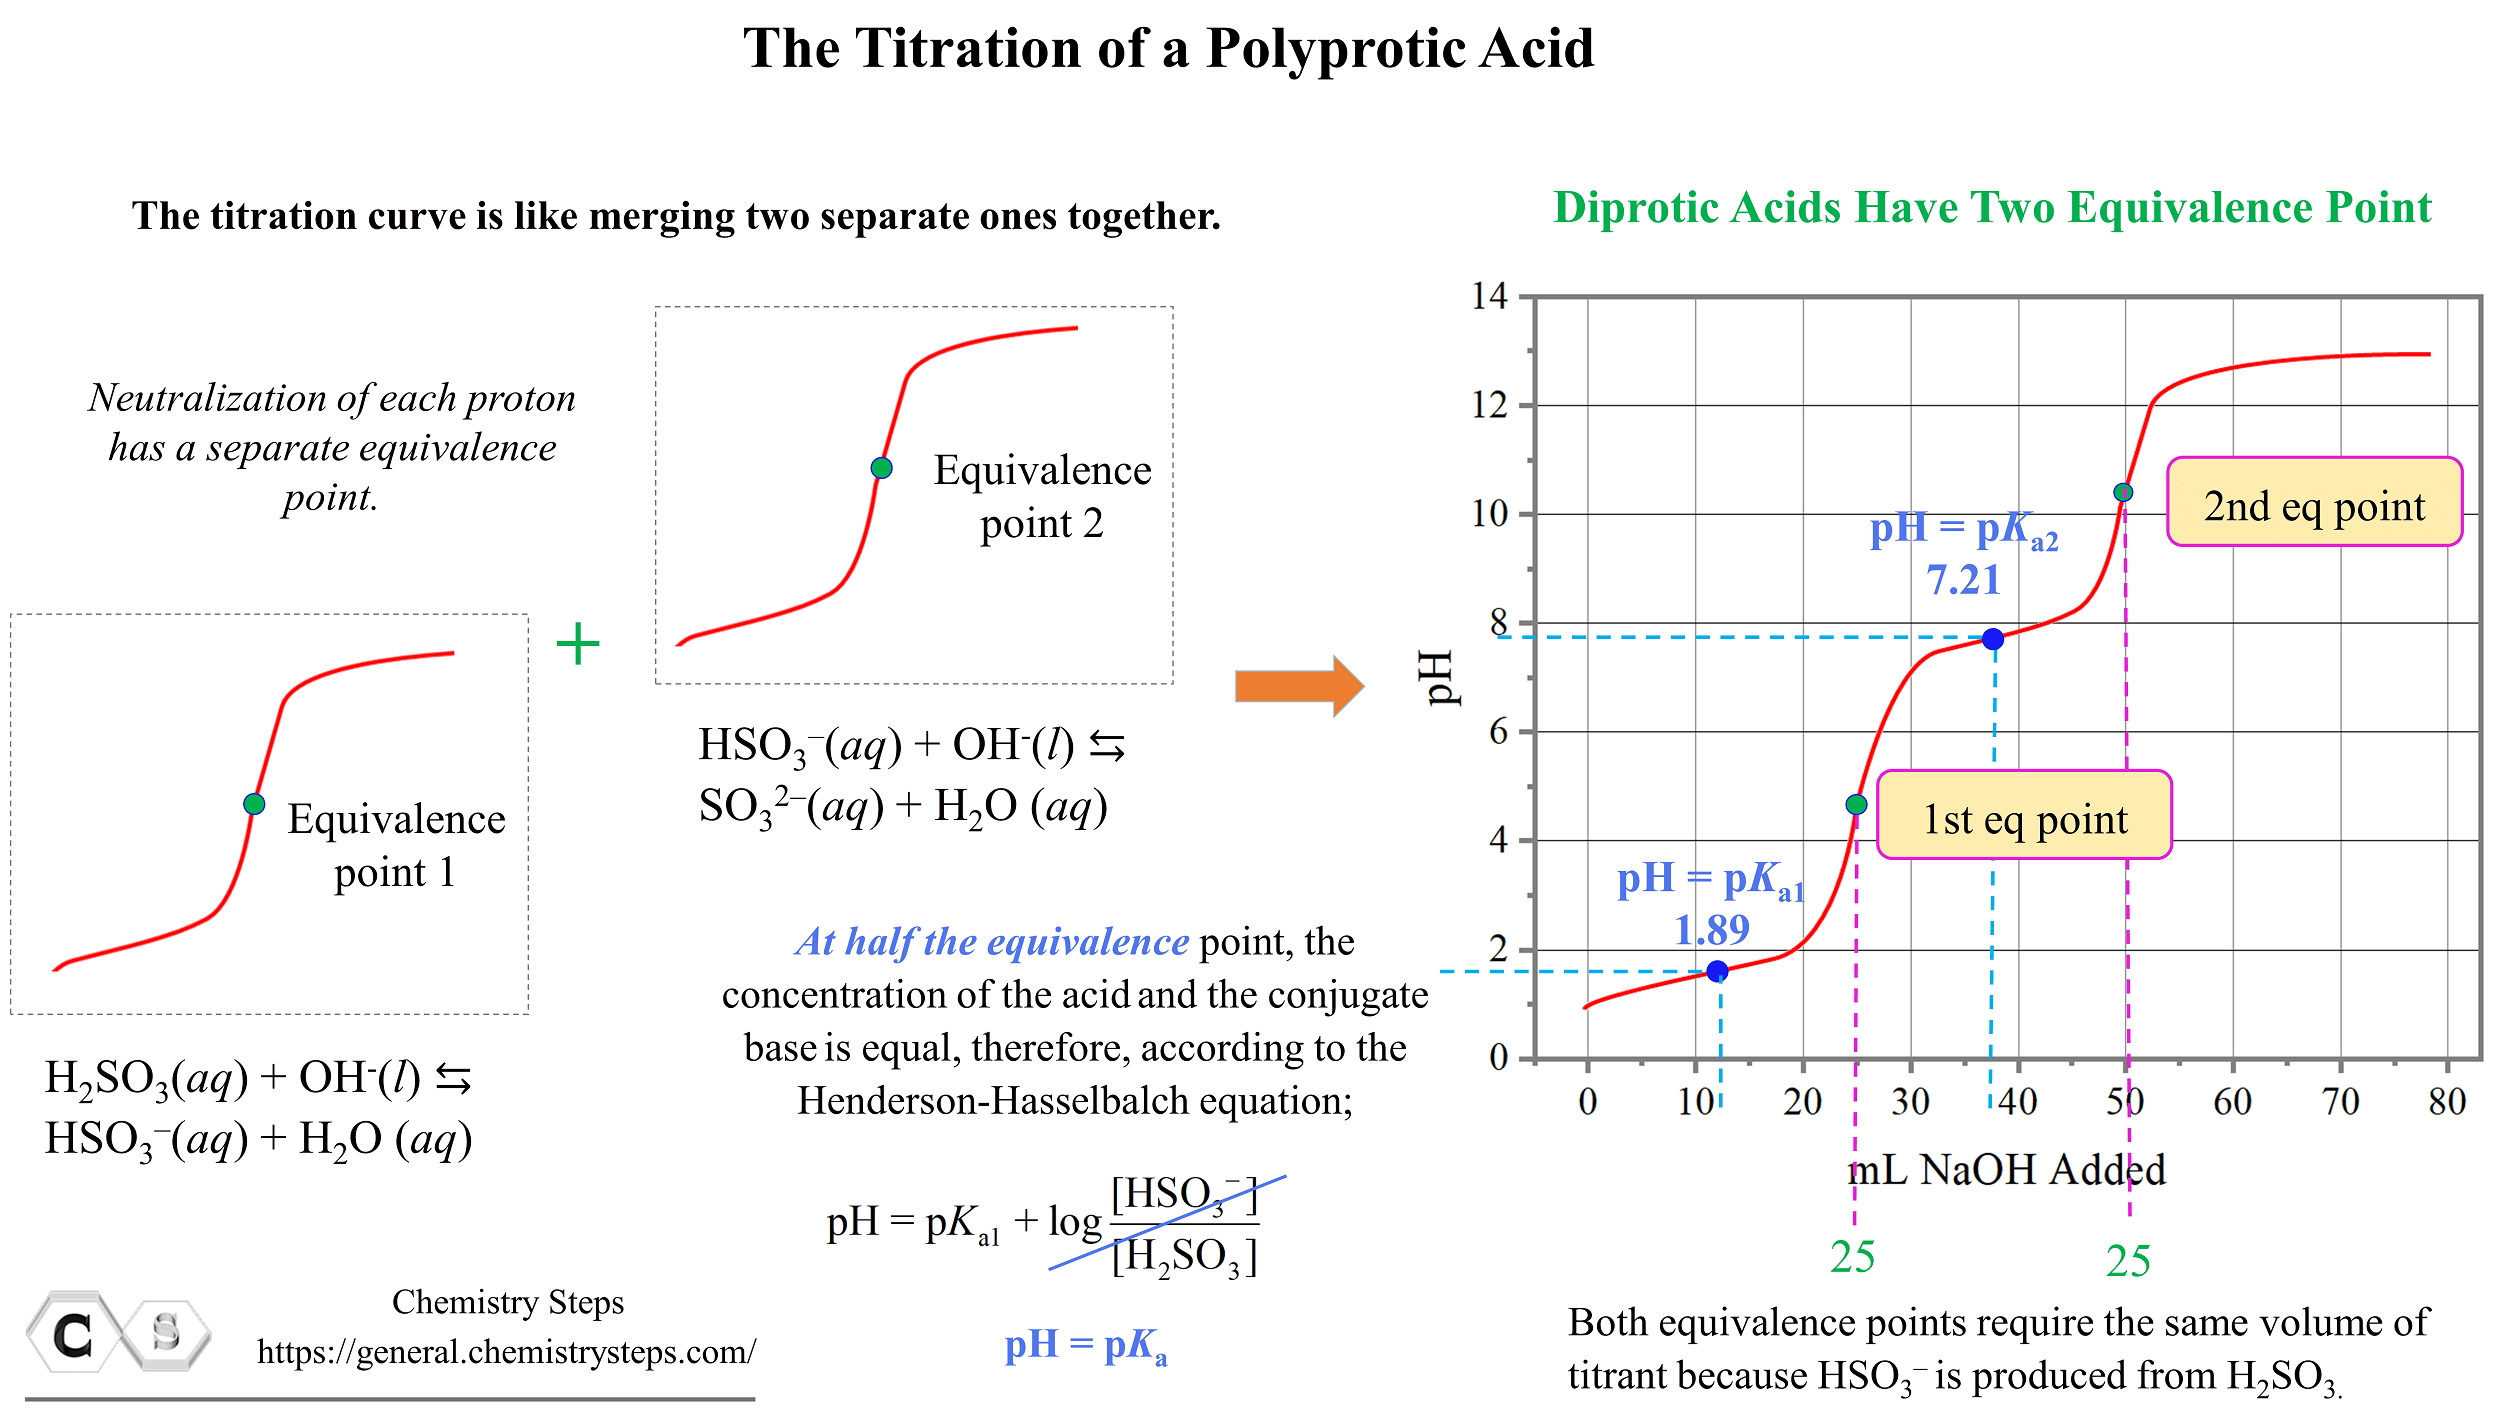 The titration curve for Polyprotic Acids